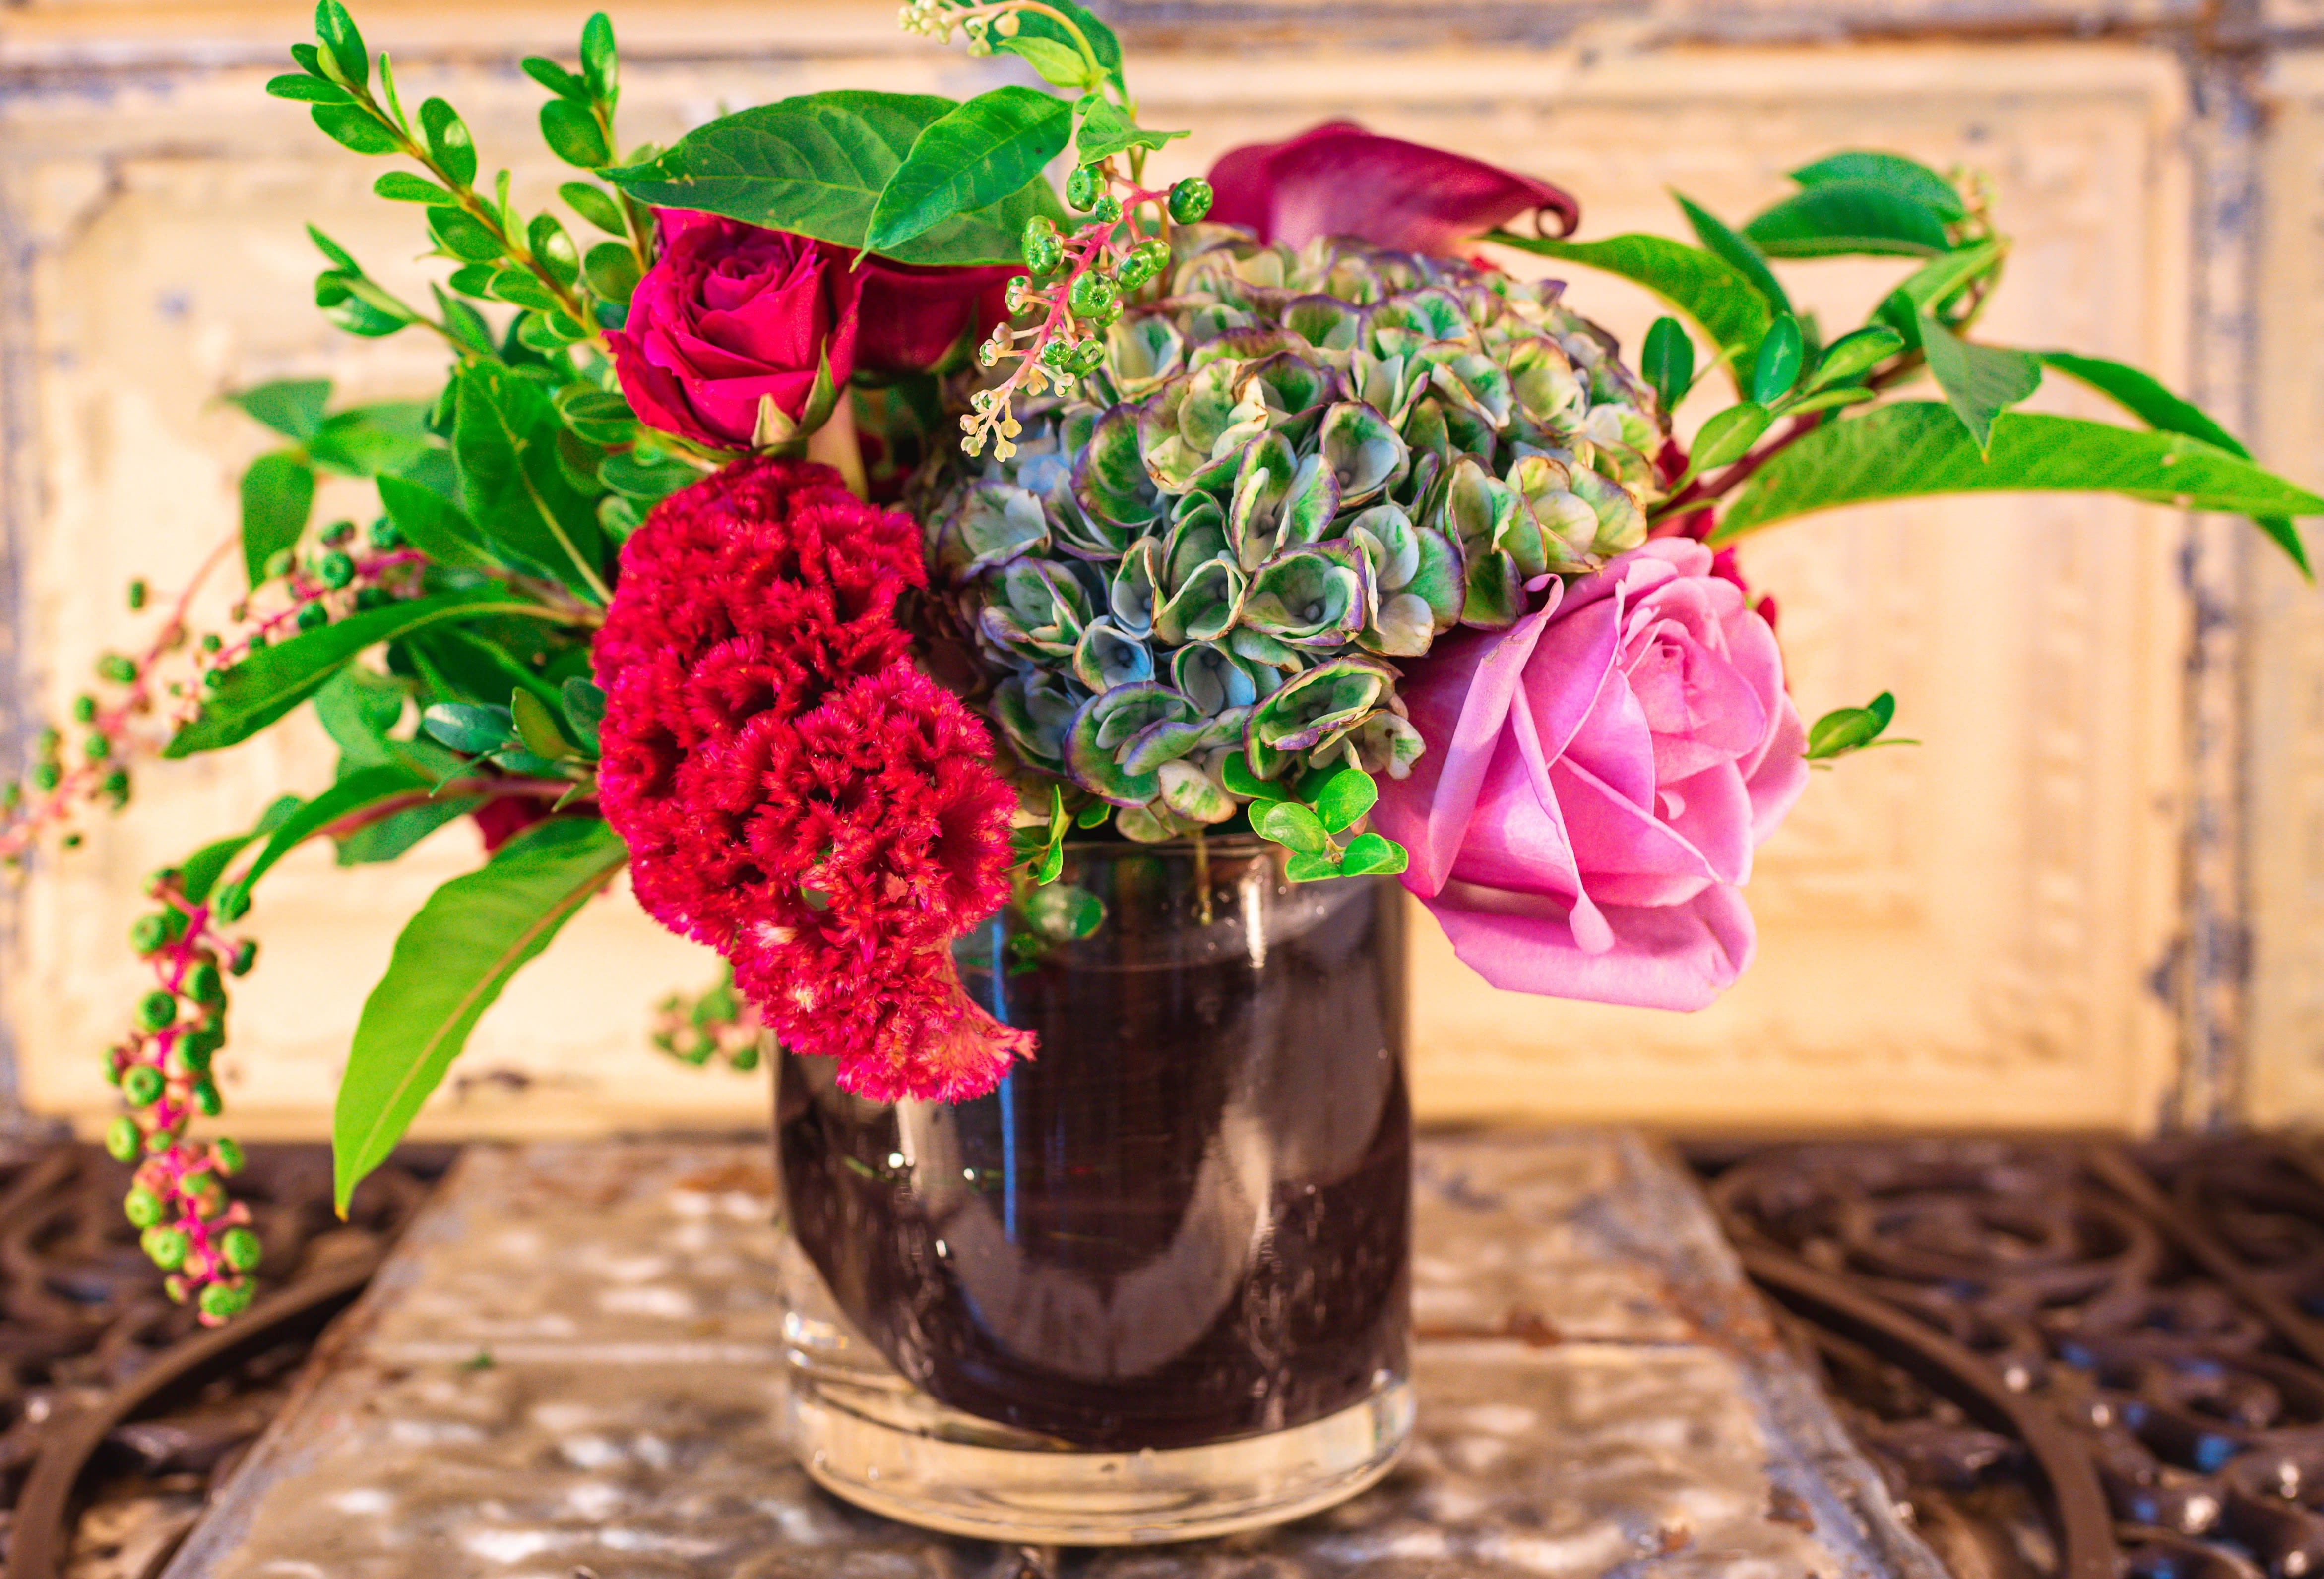 BB King - This stunning arrangement of hydrangeas, roses, cockscomb, and chokeberries surrounded by a ti leaf wrap will bring your home life.